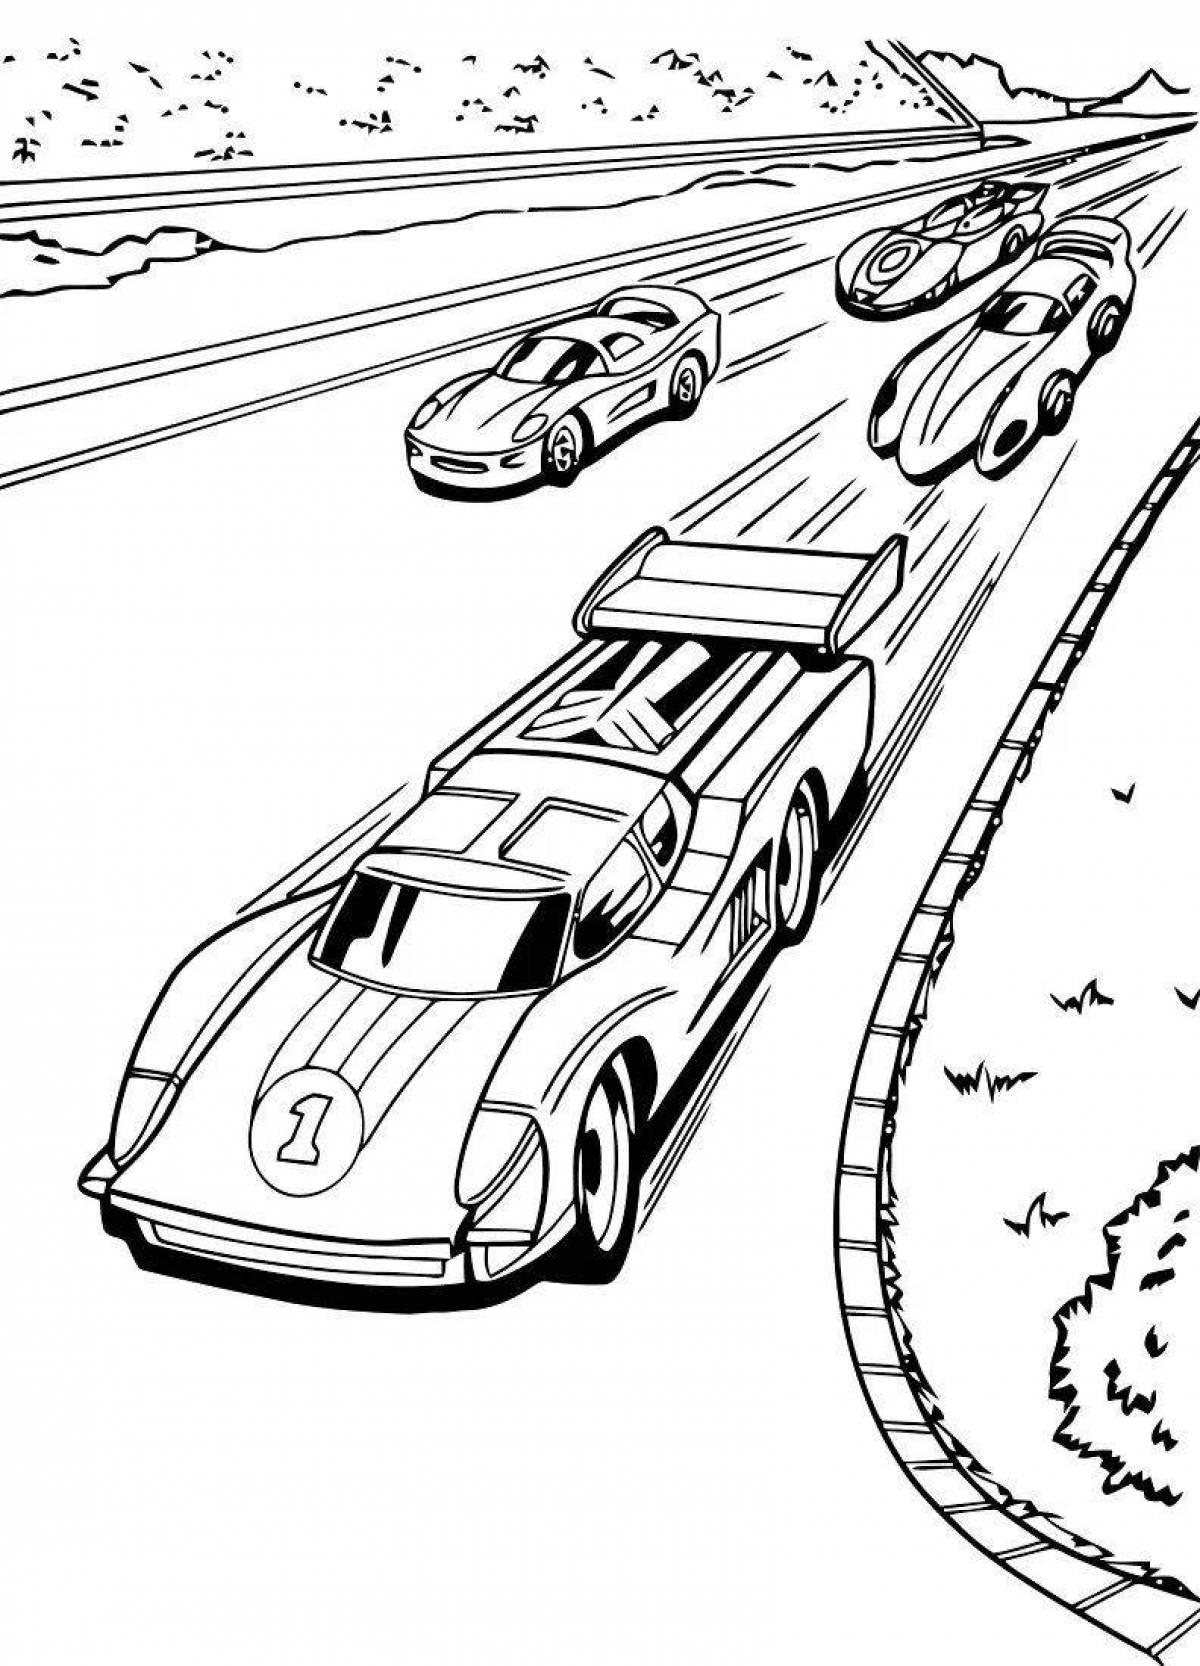 Intricate racing 2 coloring pages